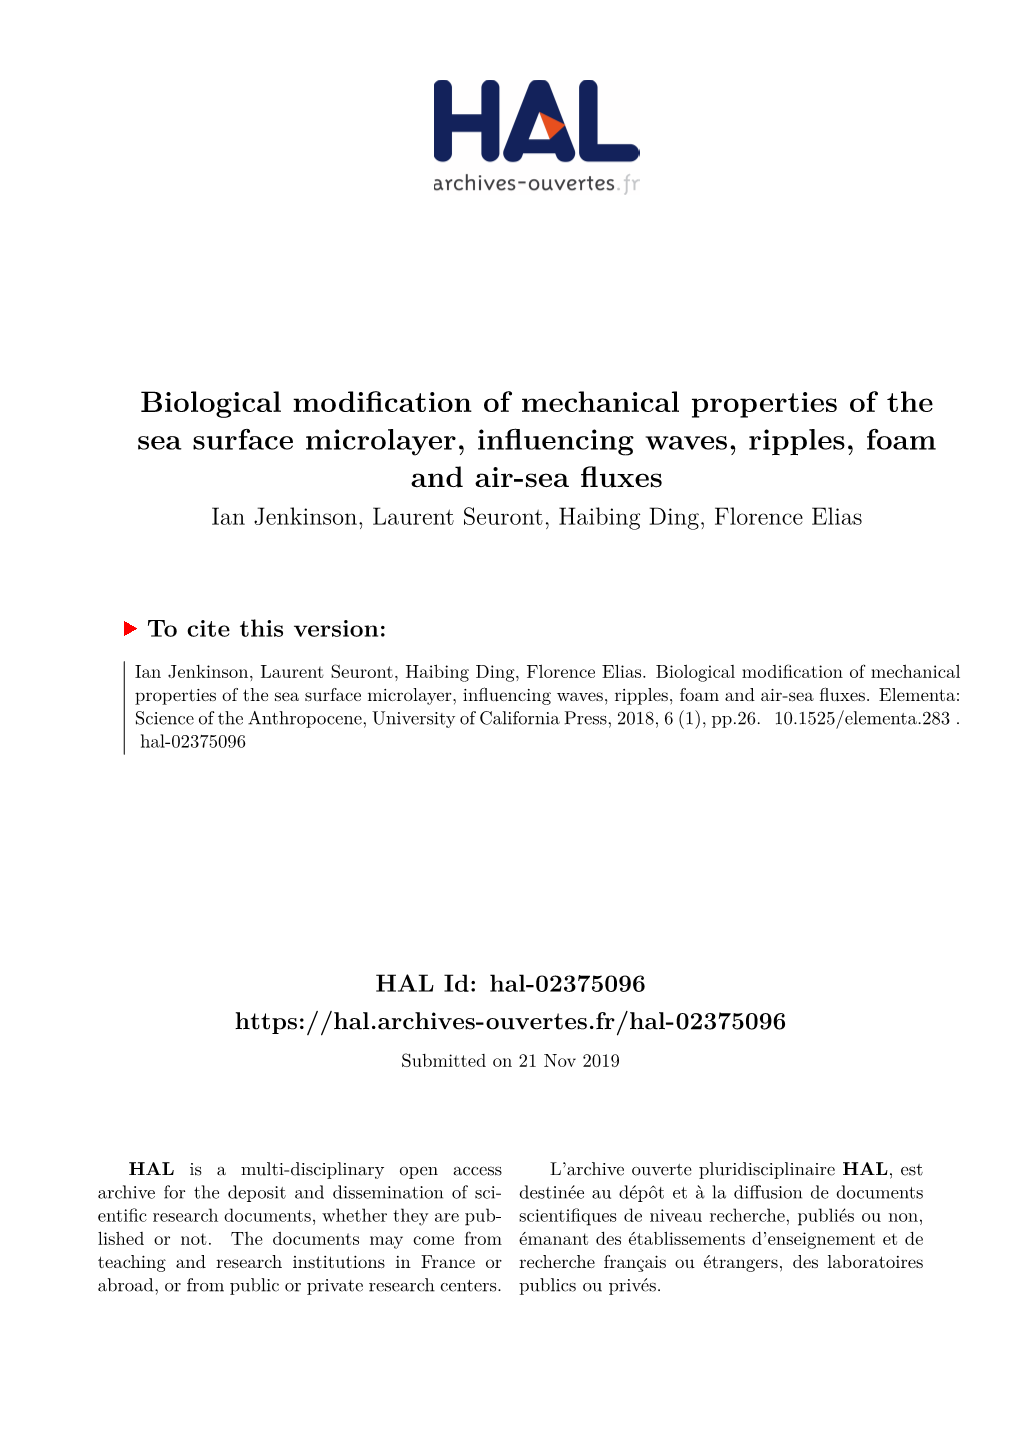 Biological Modification of Mechanical Properties of the Sea Surface